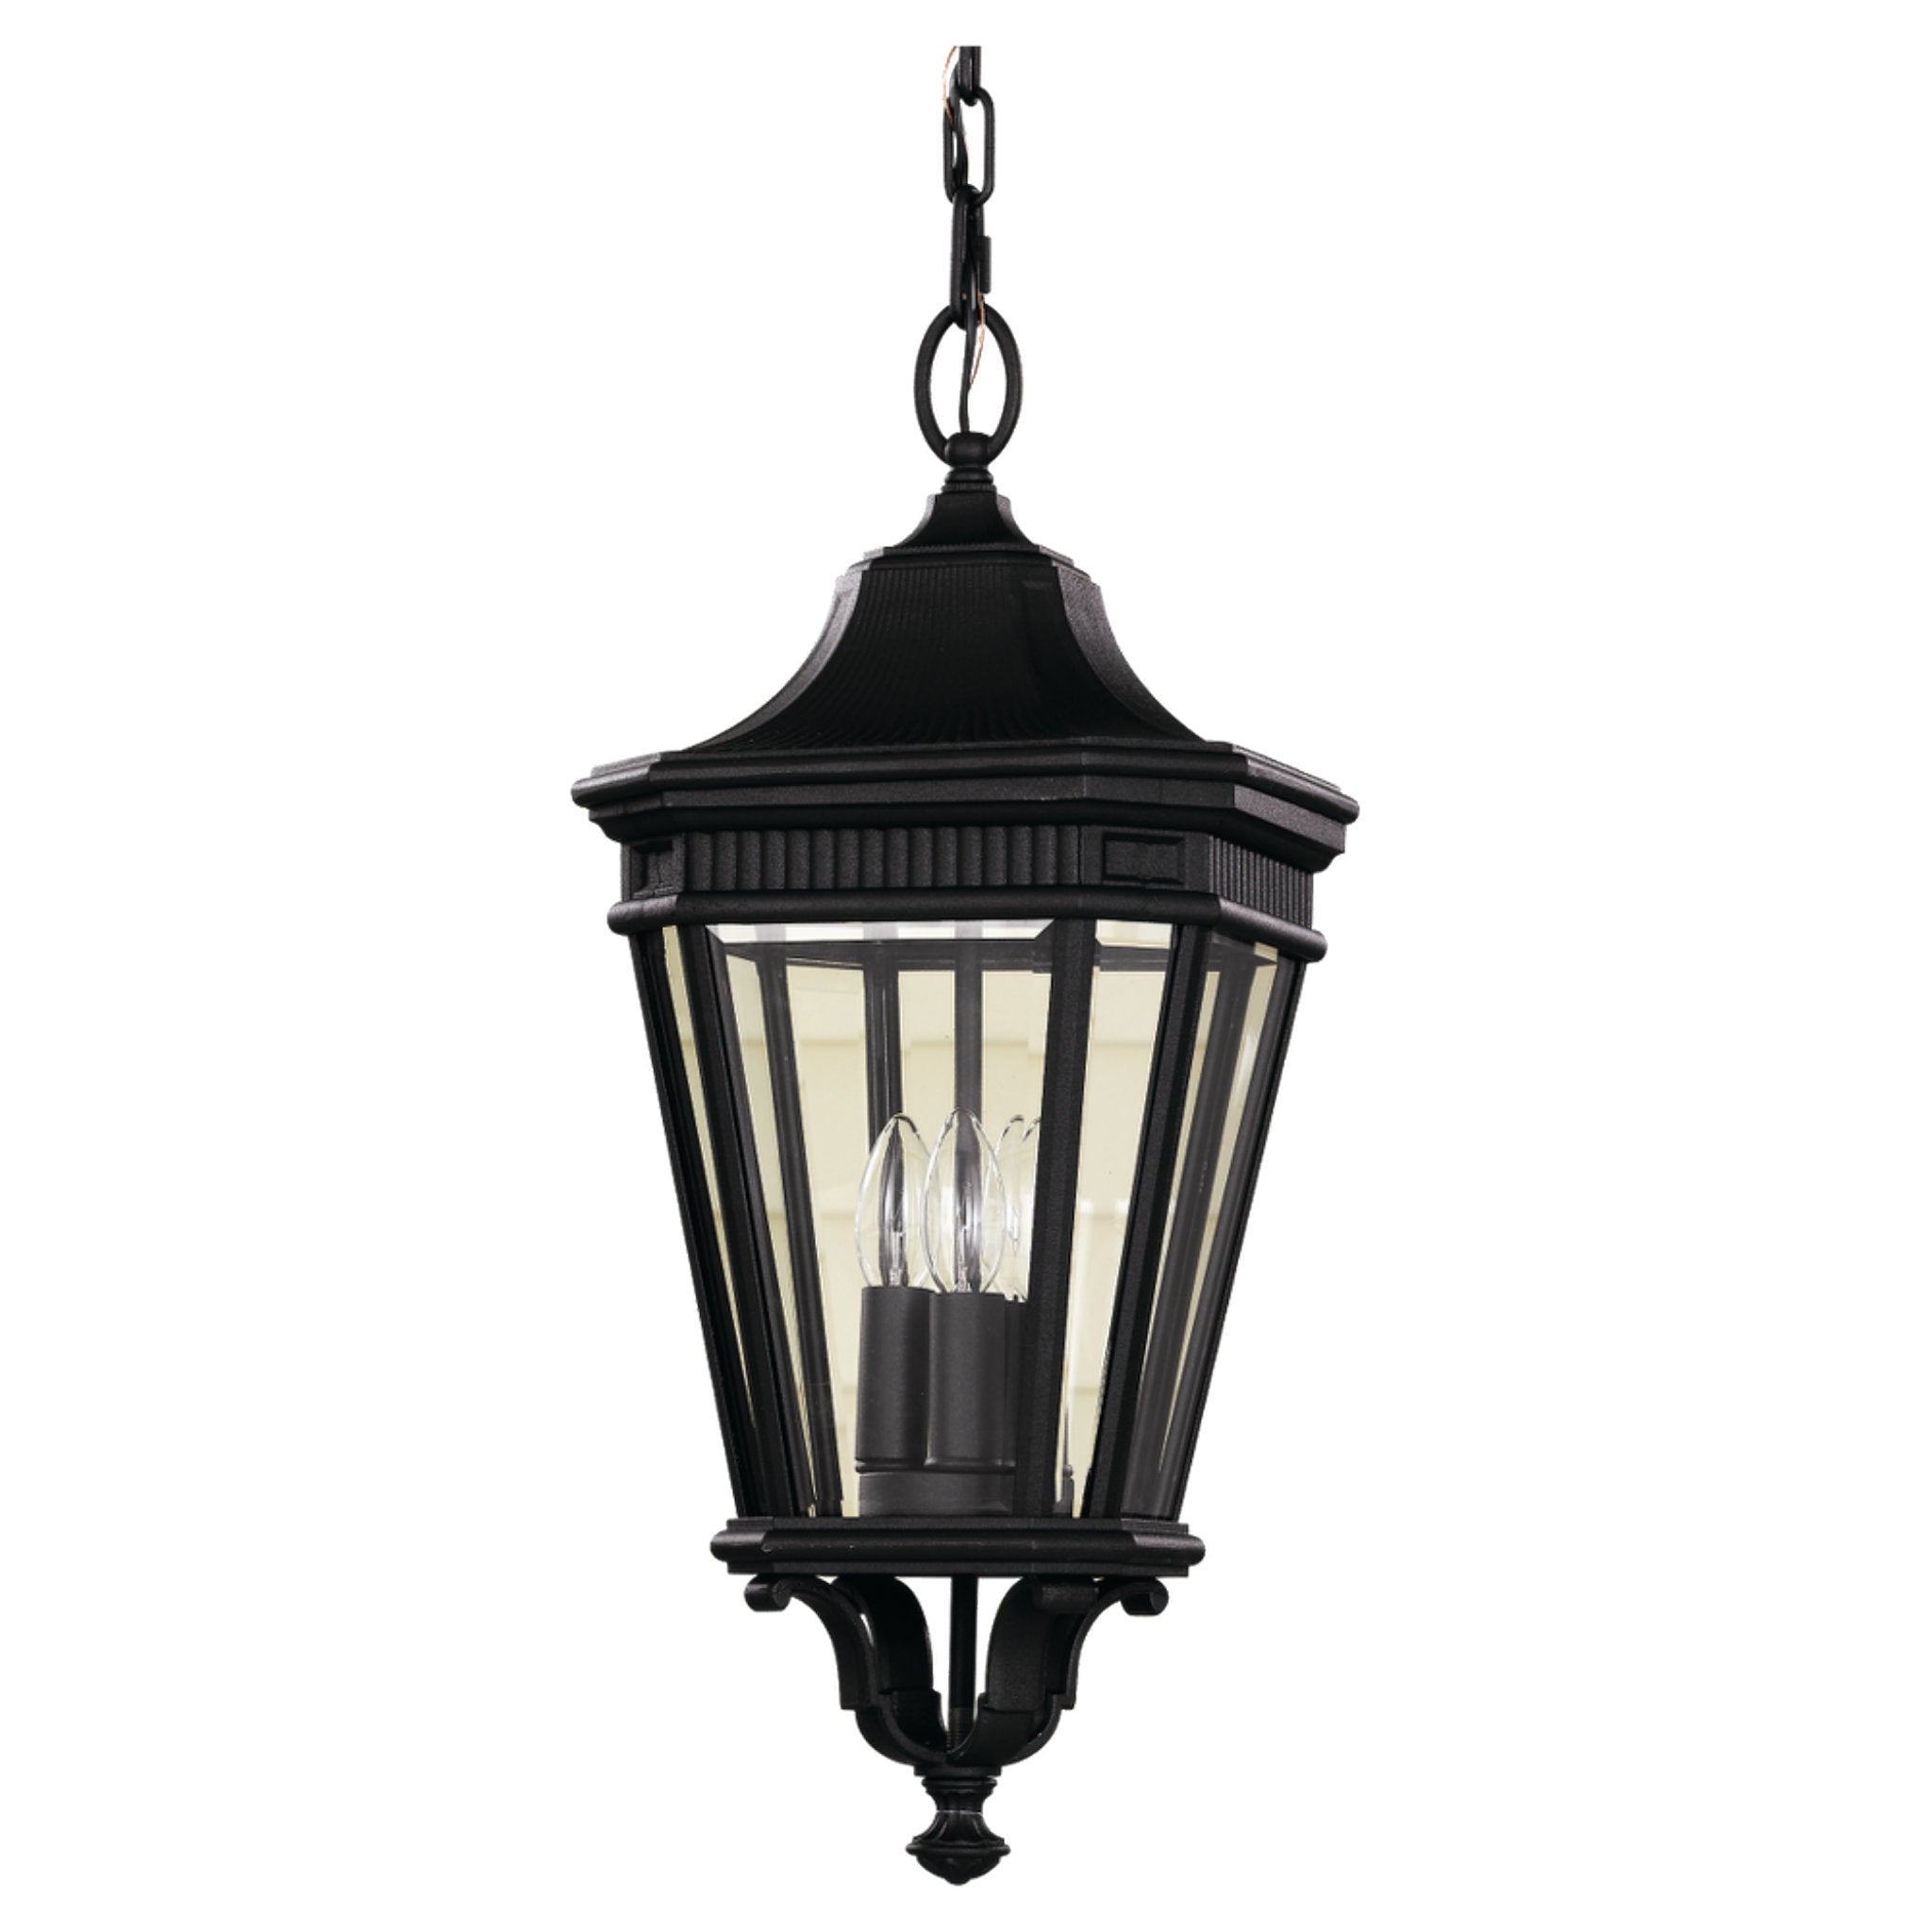 Cotswold Lane Small Pendant Traditional Outdoor Fixture 9.5" Width 21.5" Height Aluminum Irregular Clear Beveled Shade in Black